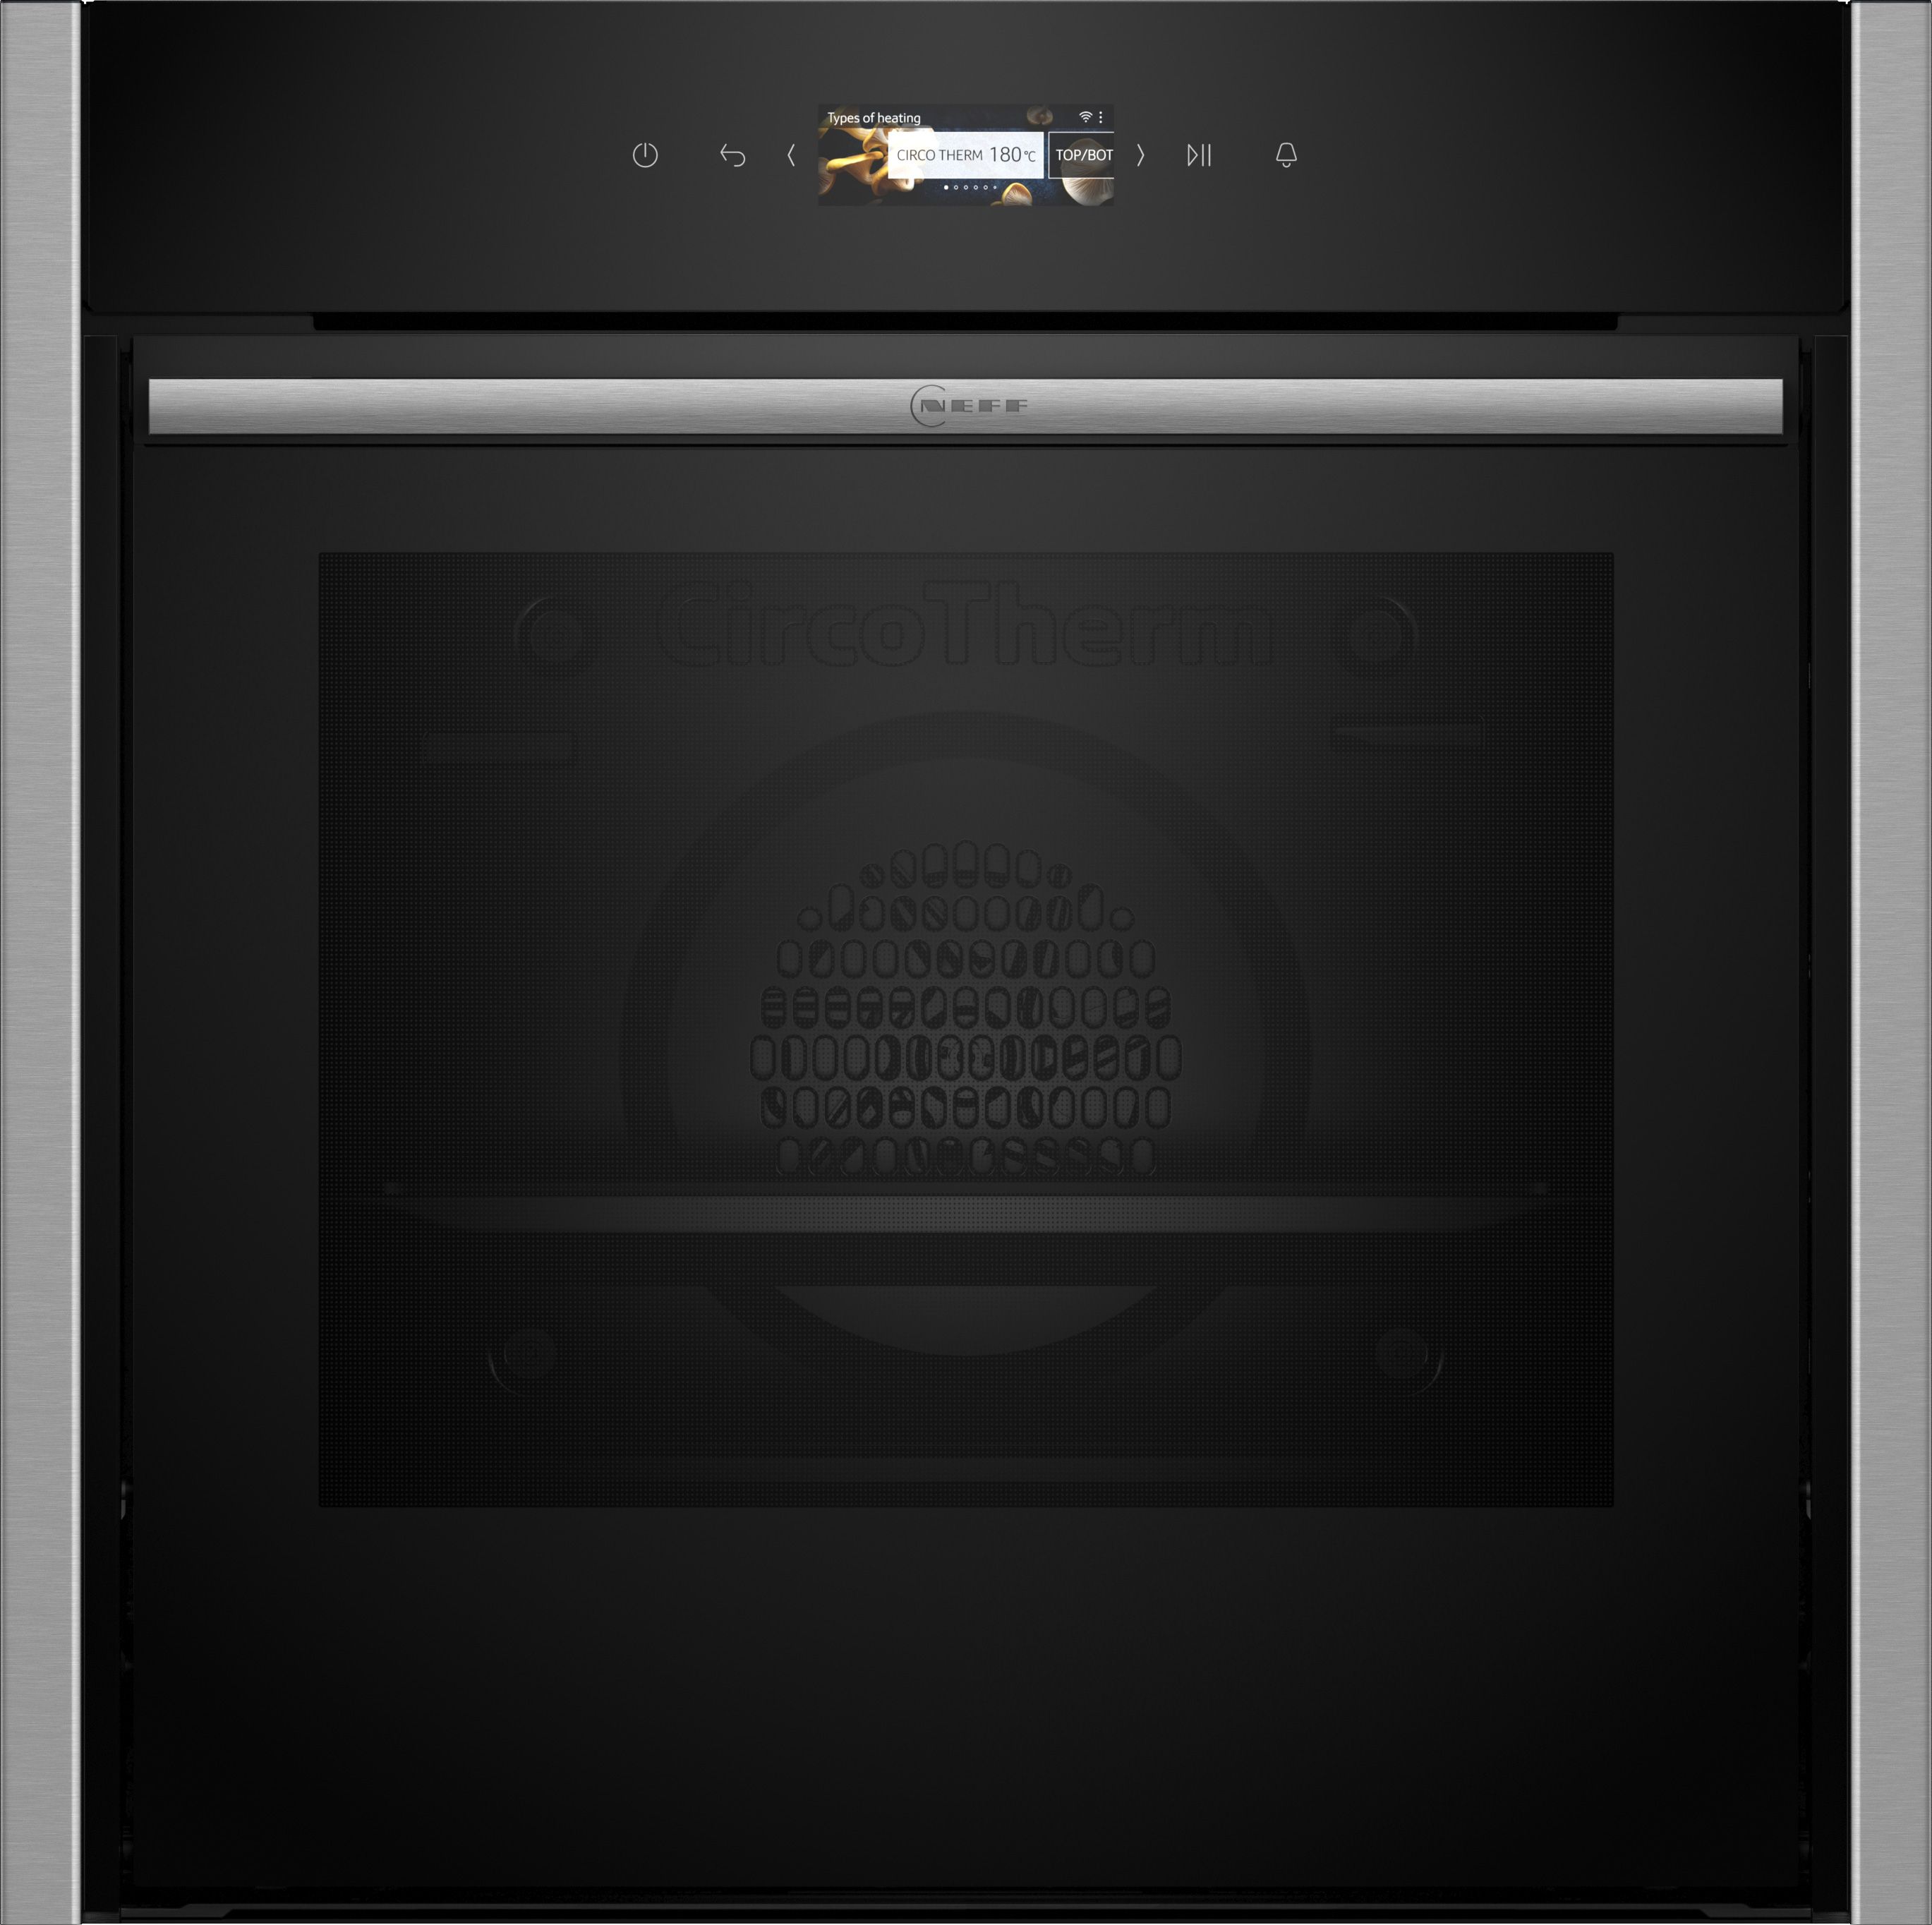 NEFF N70 Slide&Hide B54CR31N0B Built In Electric Single Oven - Stainless Steel - A+ Rated, Stainless Steel